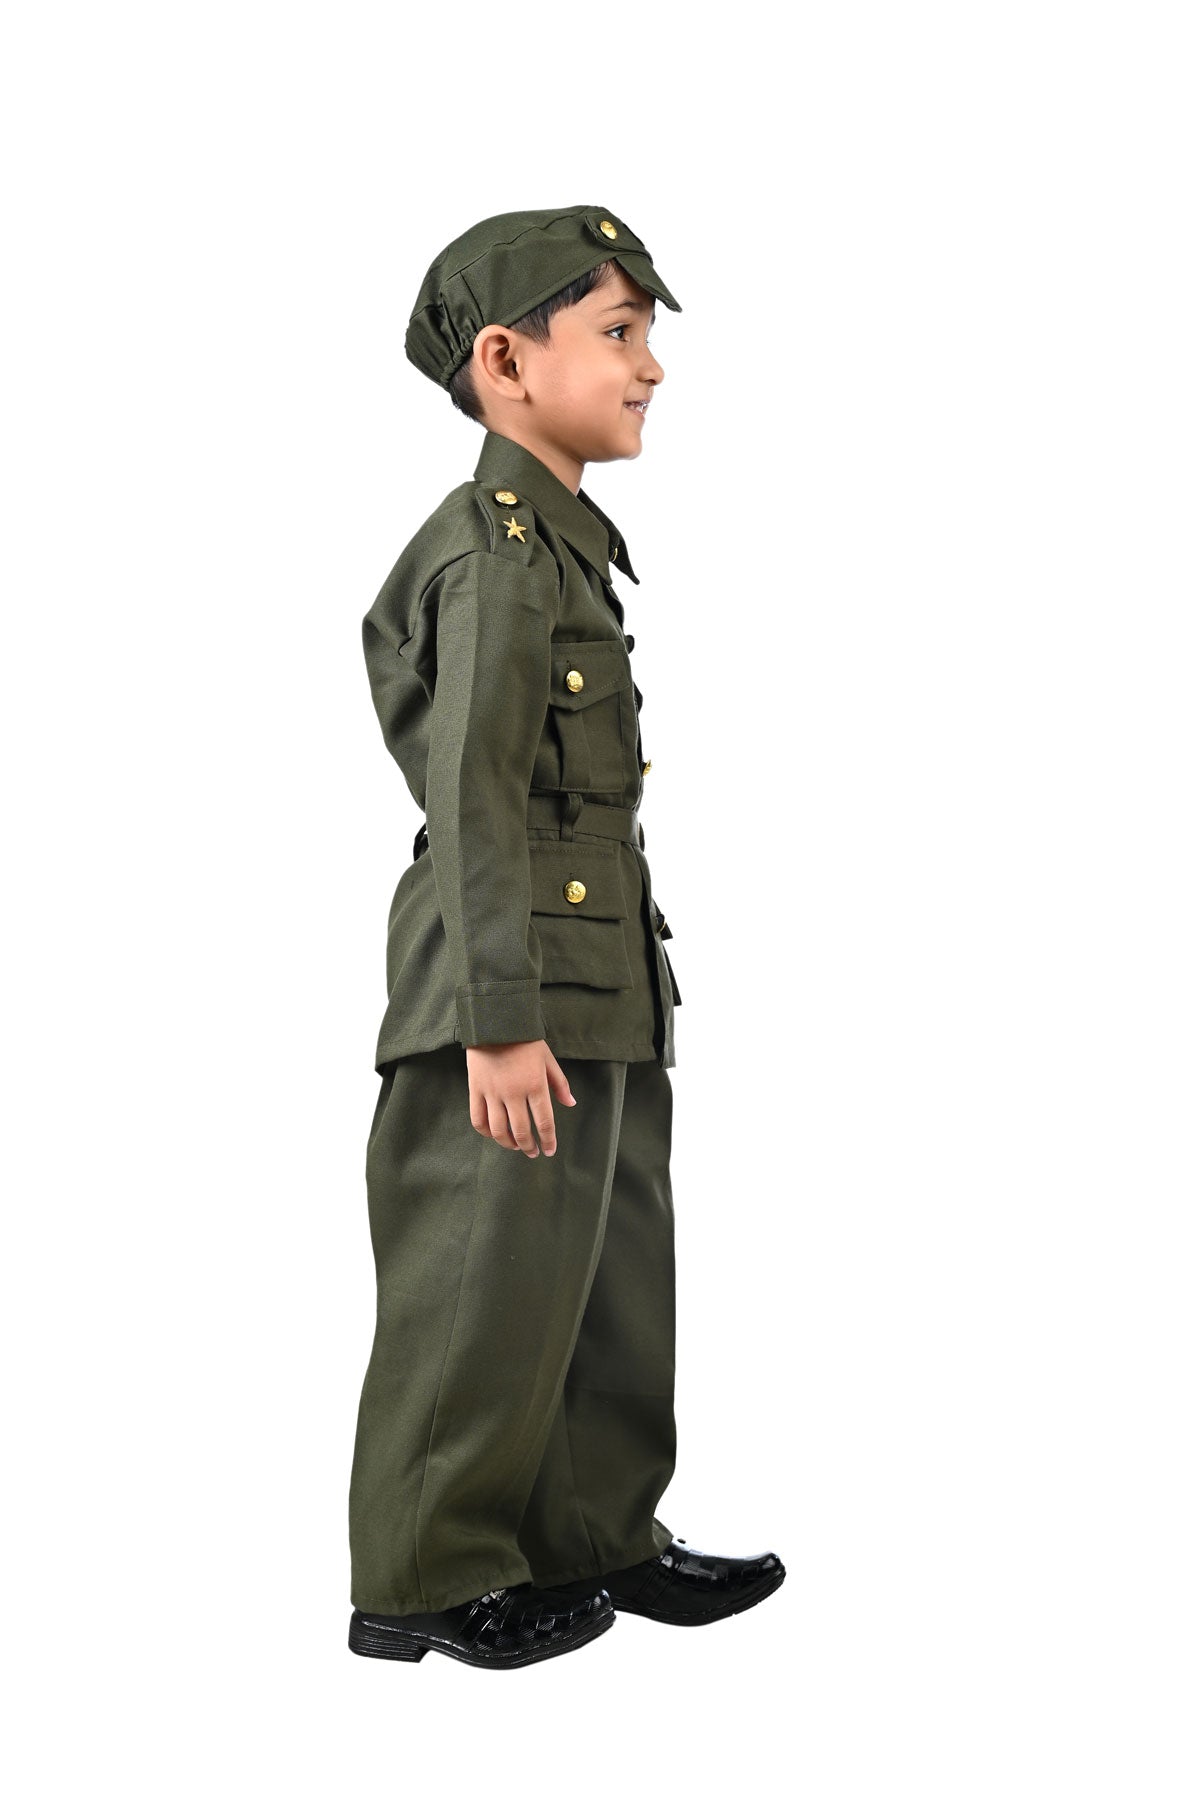 My Fancy Dress - Sneak up on your enemy in this Camouflage Soldier boys army  costume. This classic costume comes with authentic-looking army pants,  shirt, and hat--everything you'll need to march in